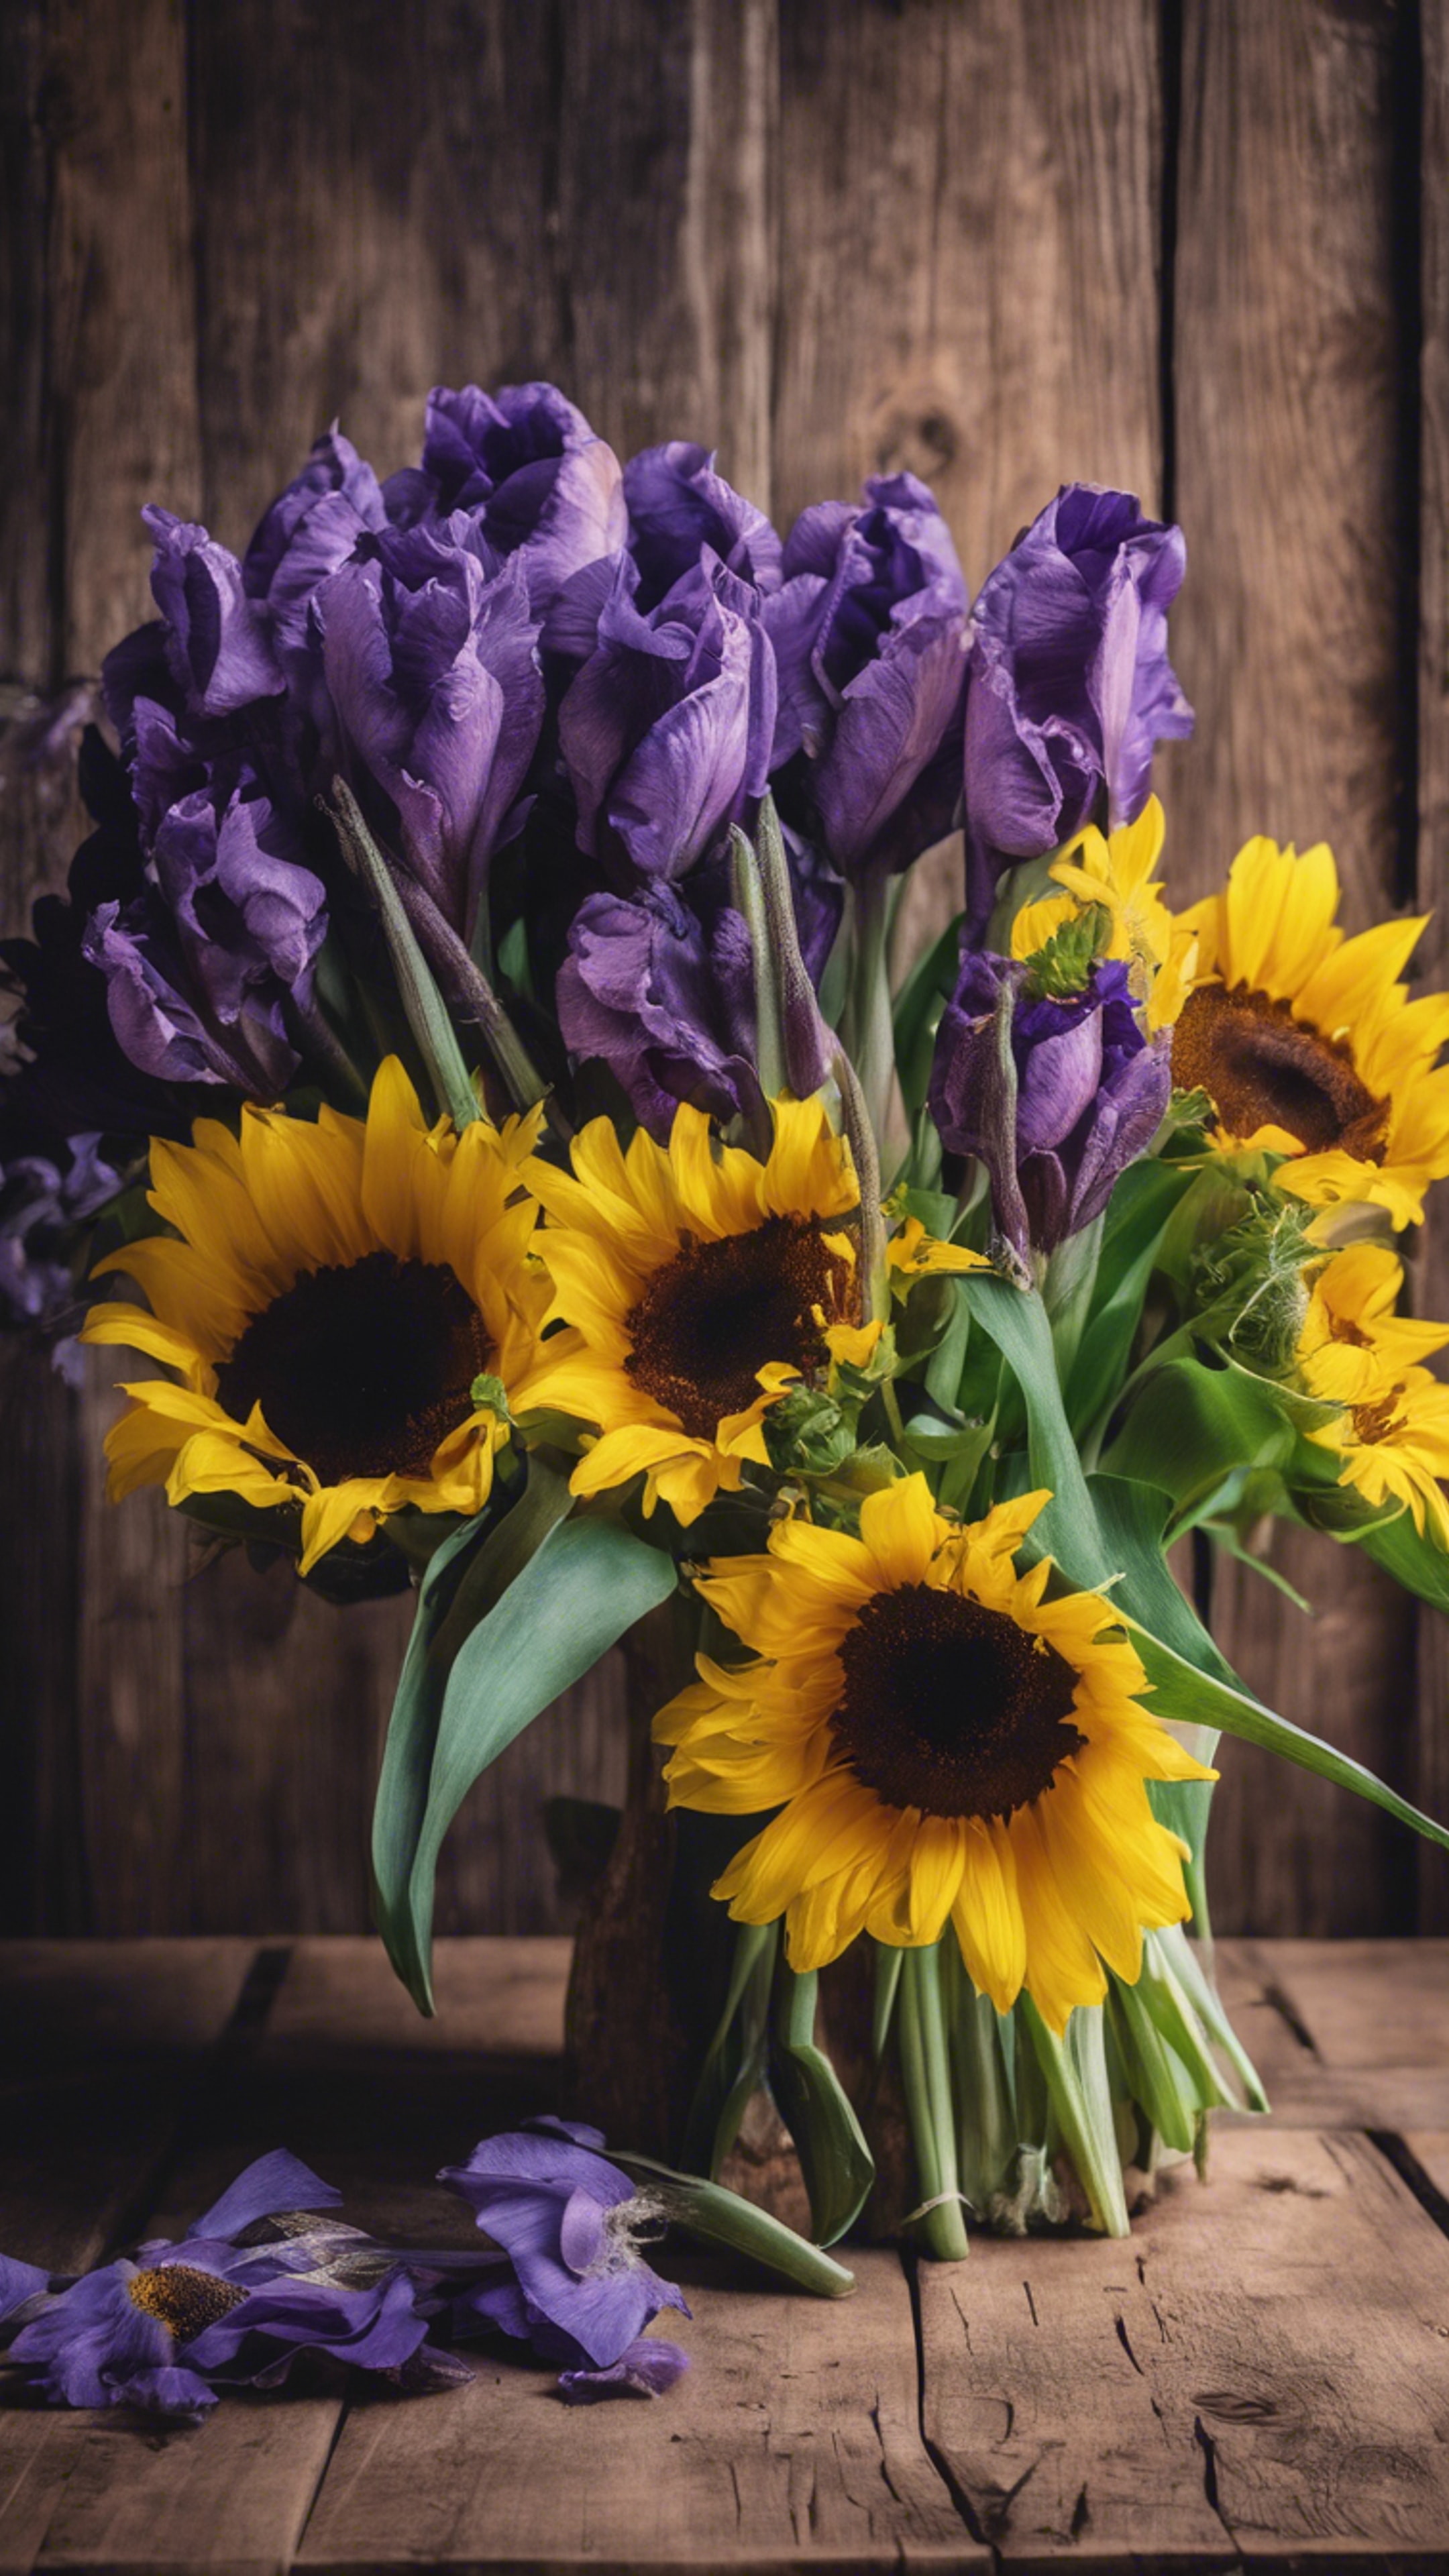 A bouquet of violet irises and bright yellow sunflowers sitting on a rustic wooden table. Tapet[036542cc0bff4a9eafa2]